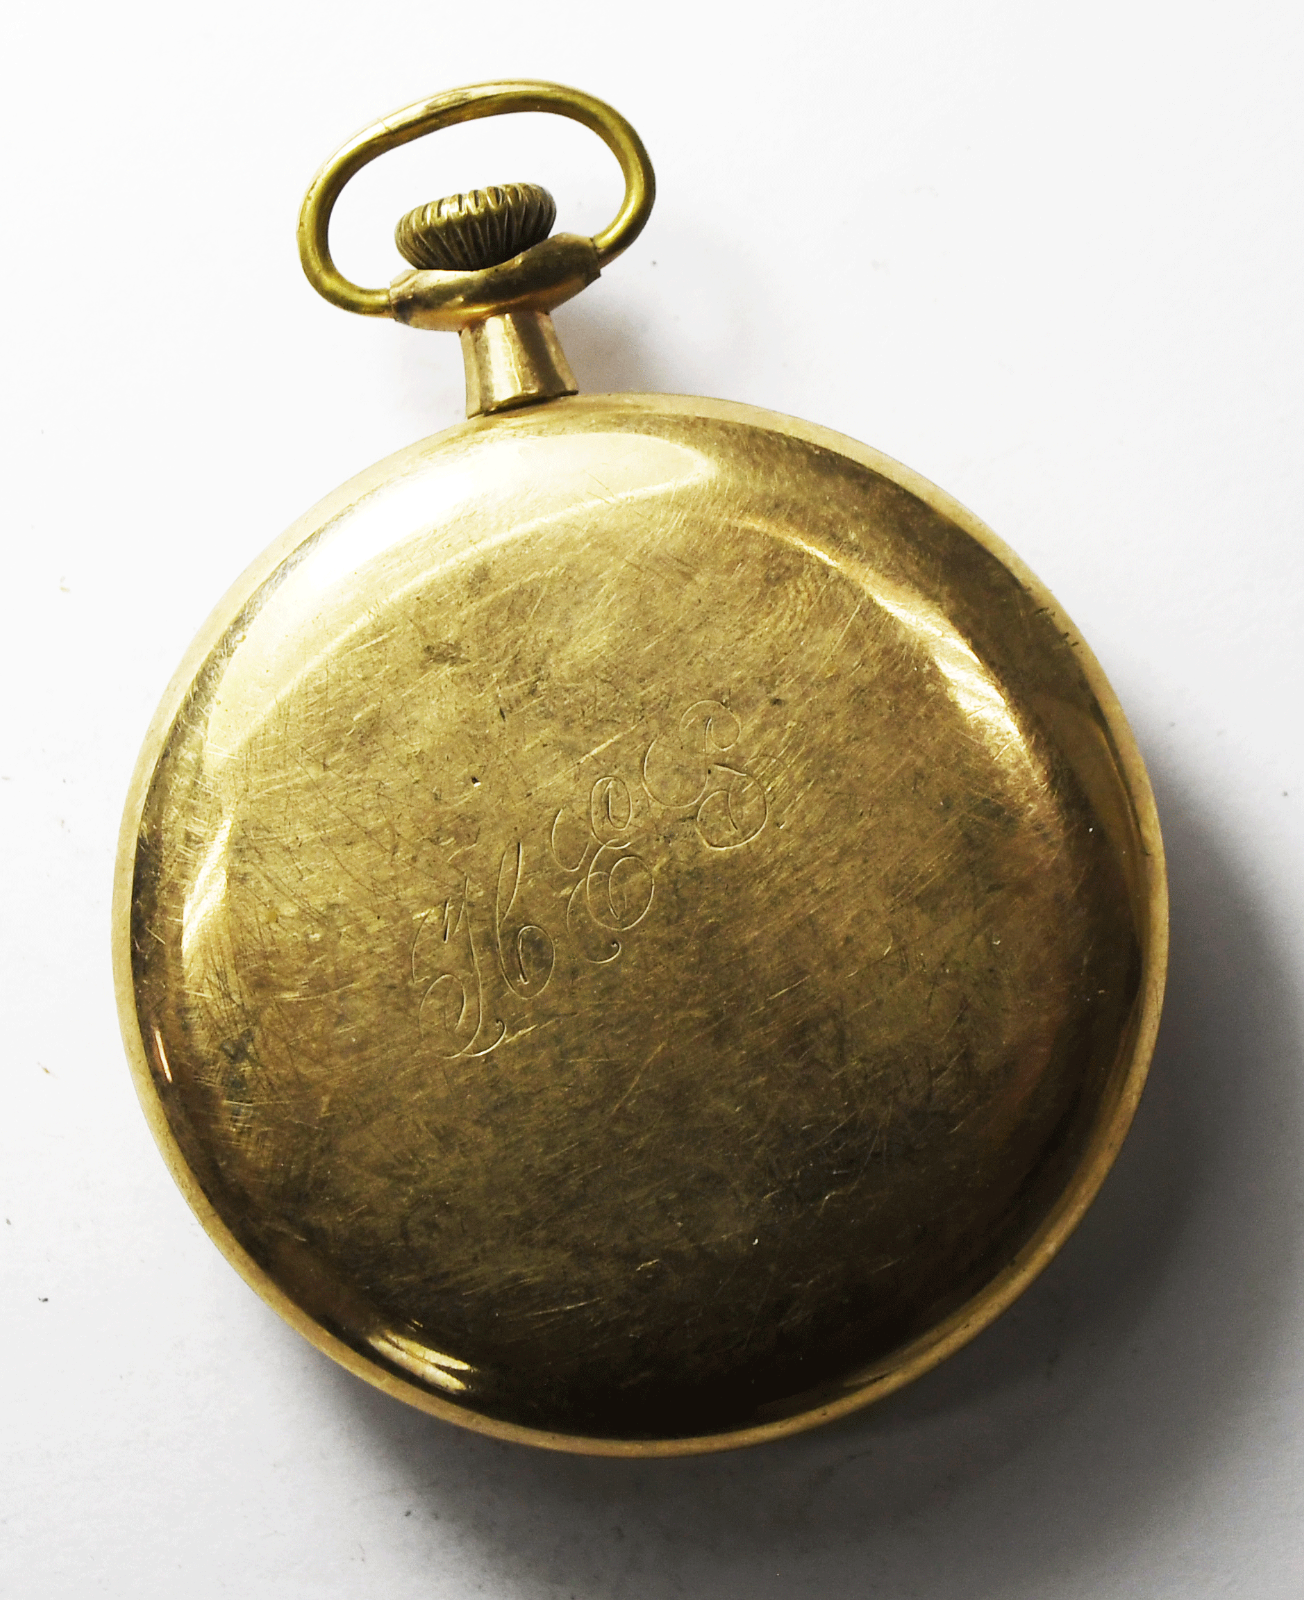 1916 Illinois Grade 404 Size 12 OF 20yr Gold Filled Pocket Watch